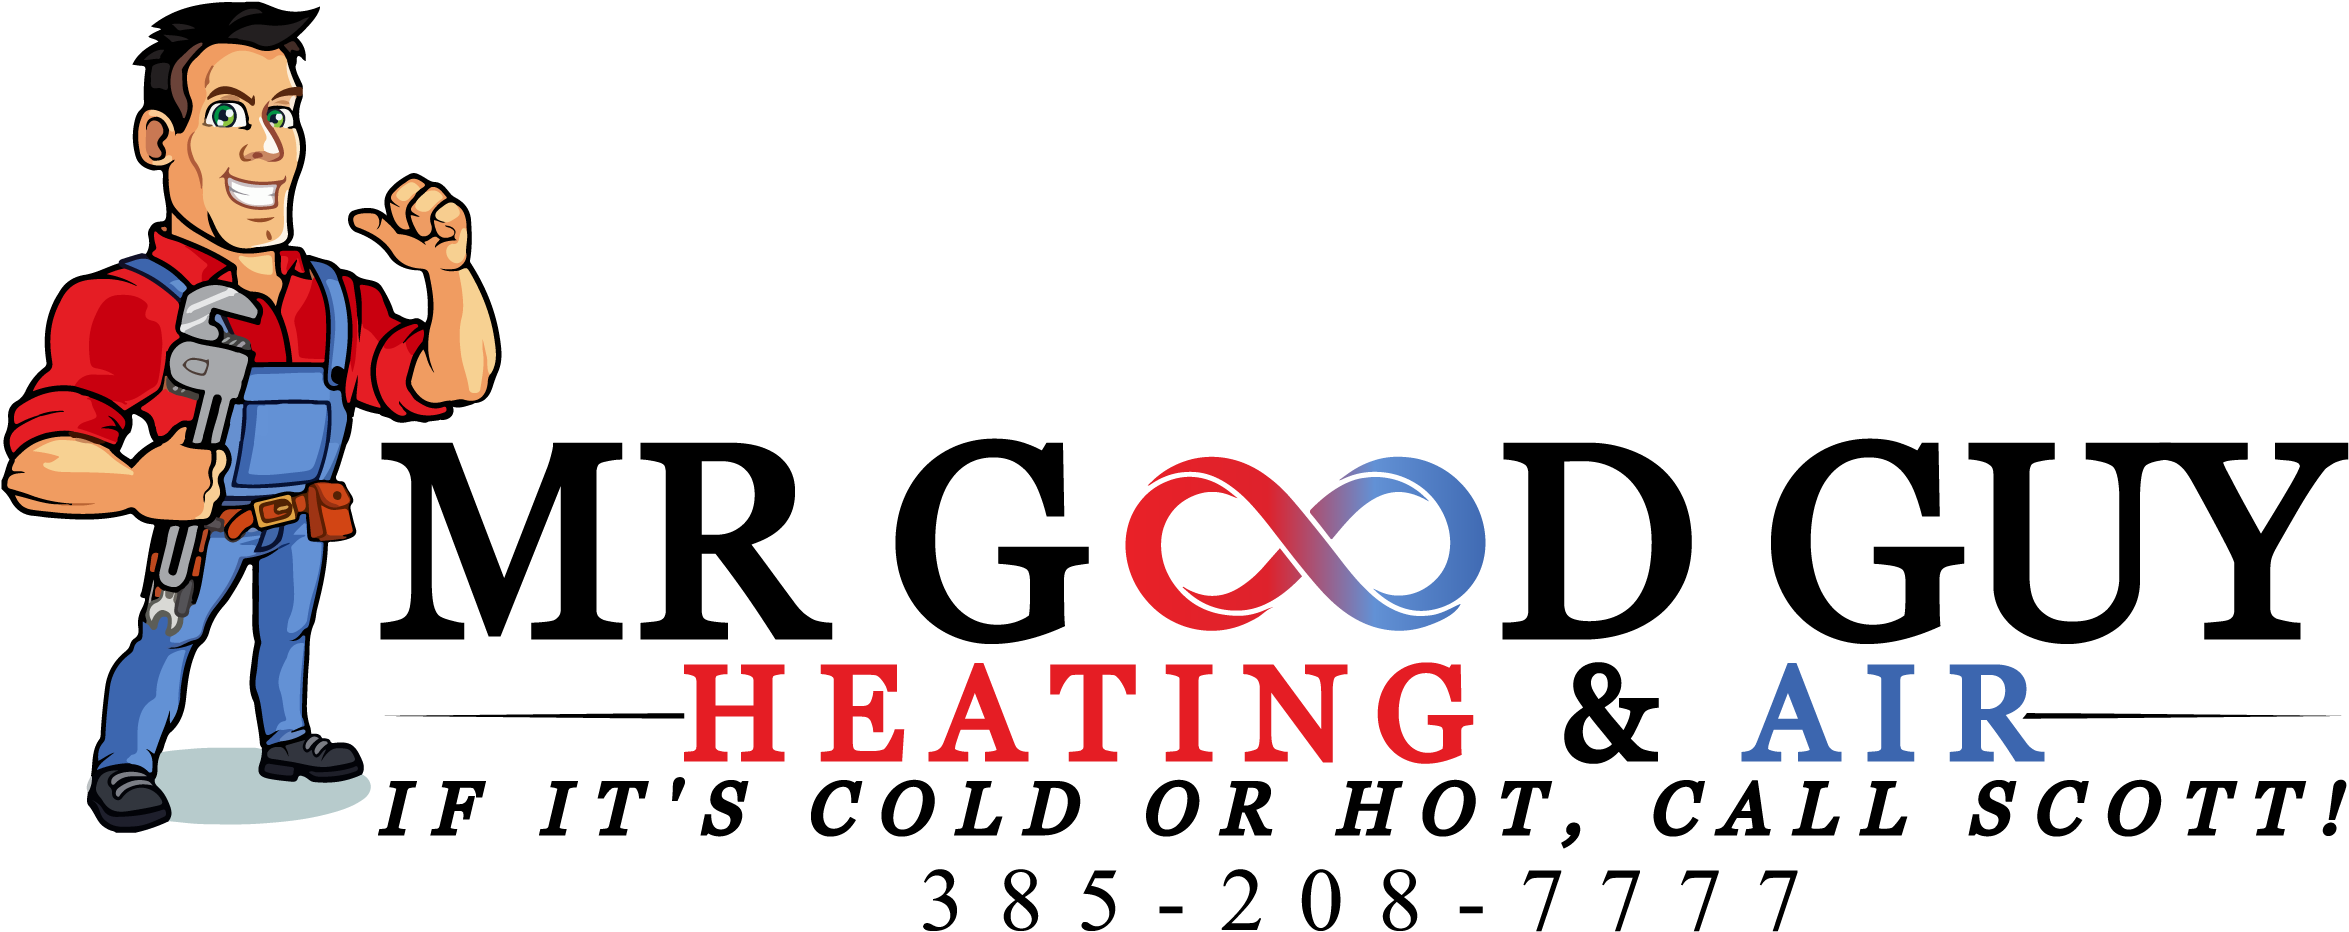 Good Guy Hvac For Heating And Cooling Services - Mr. Good Guy Hvac, Llc (2501x1007)